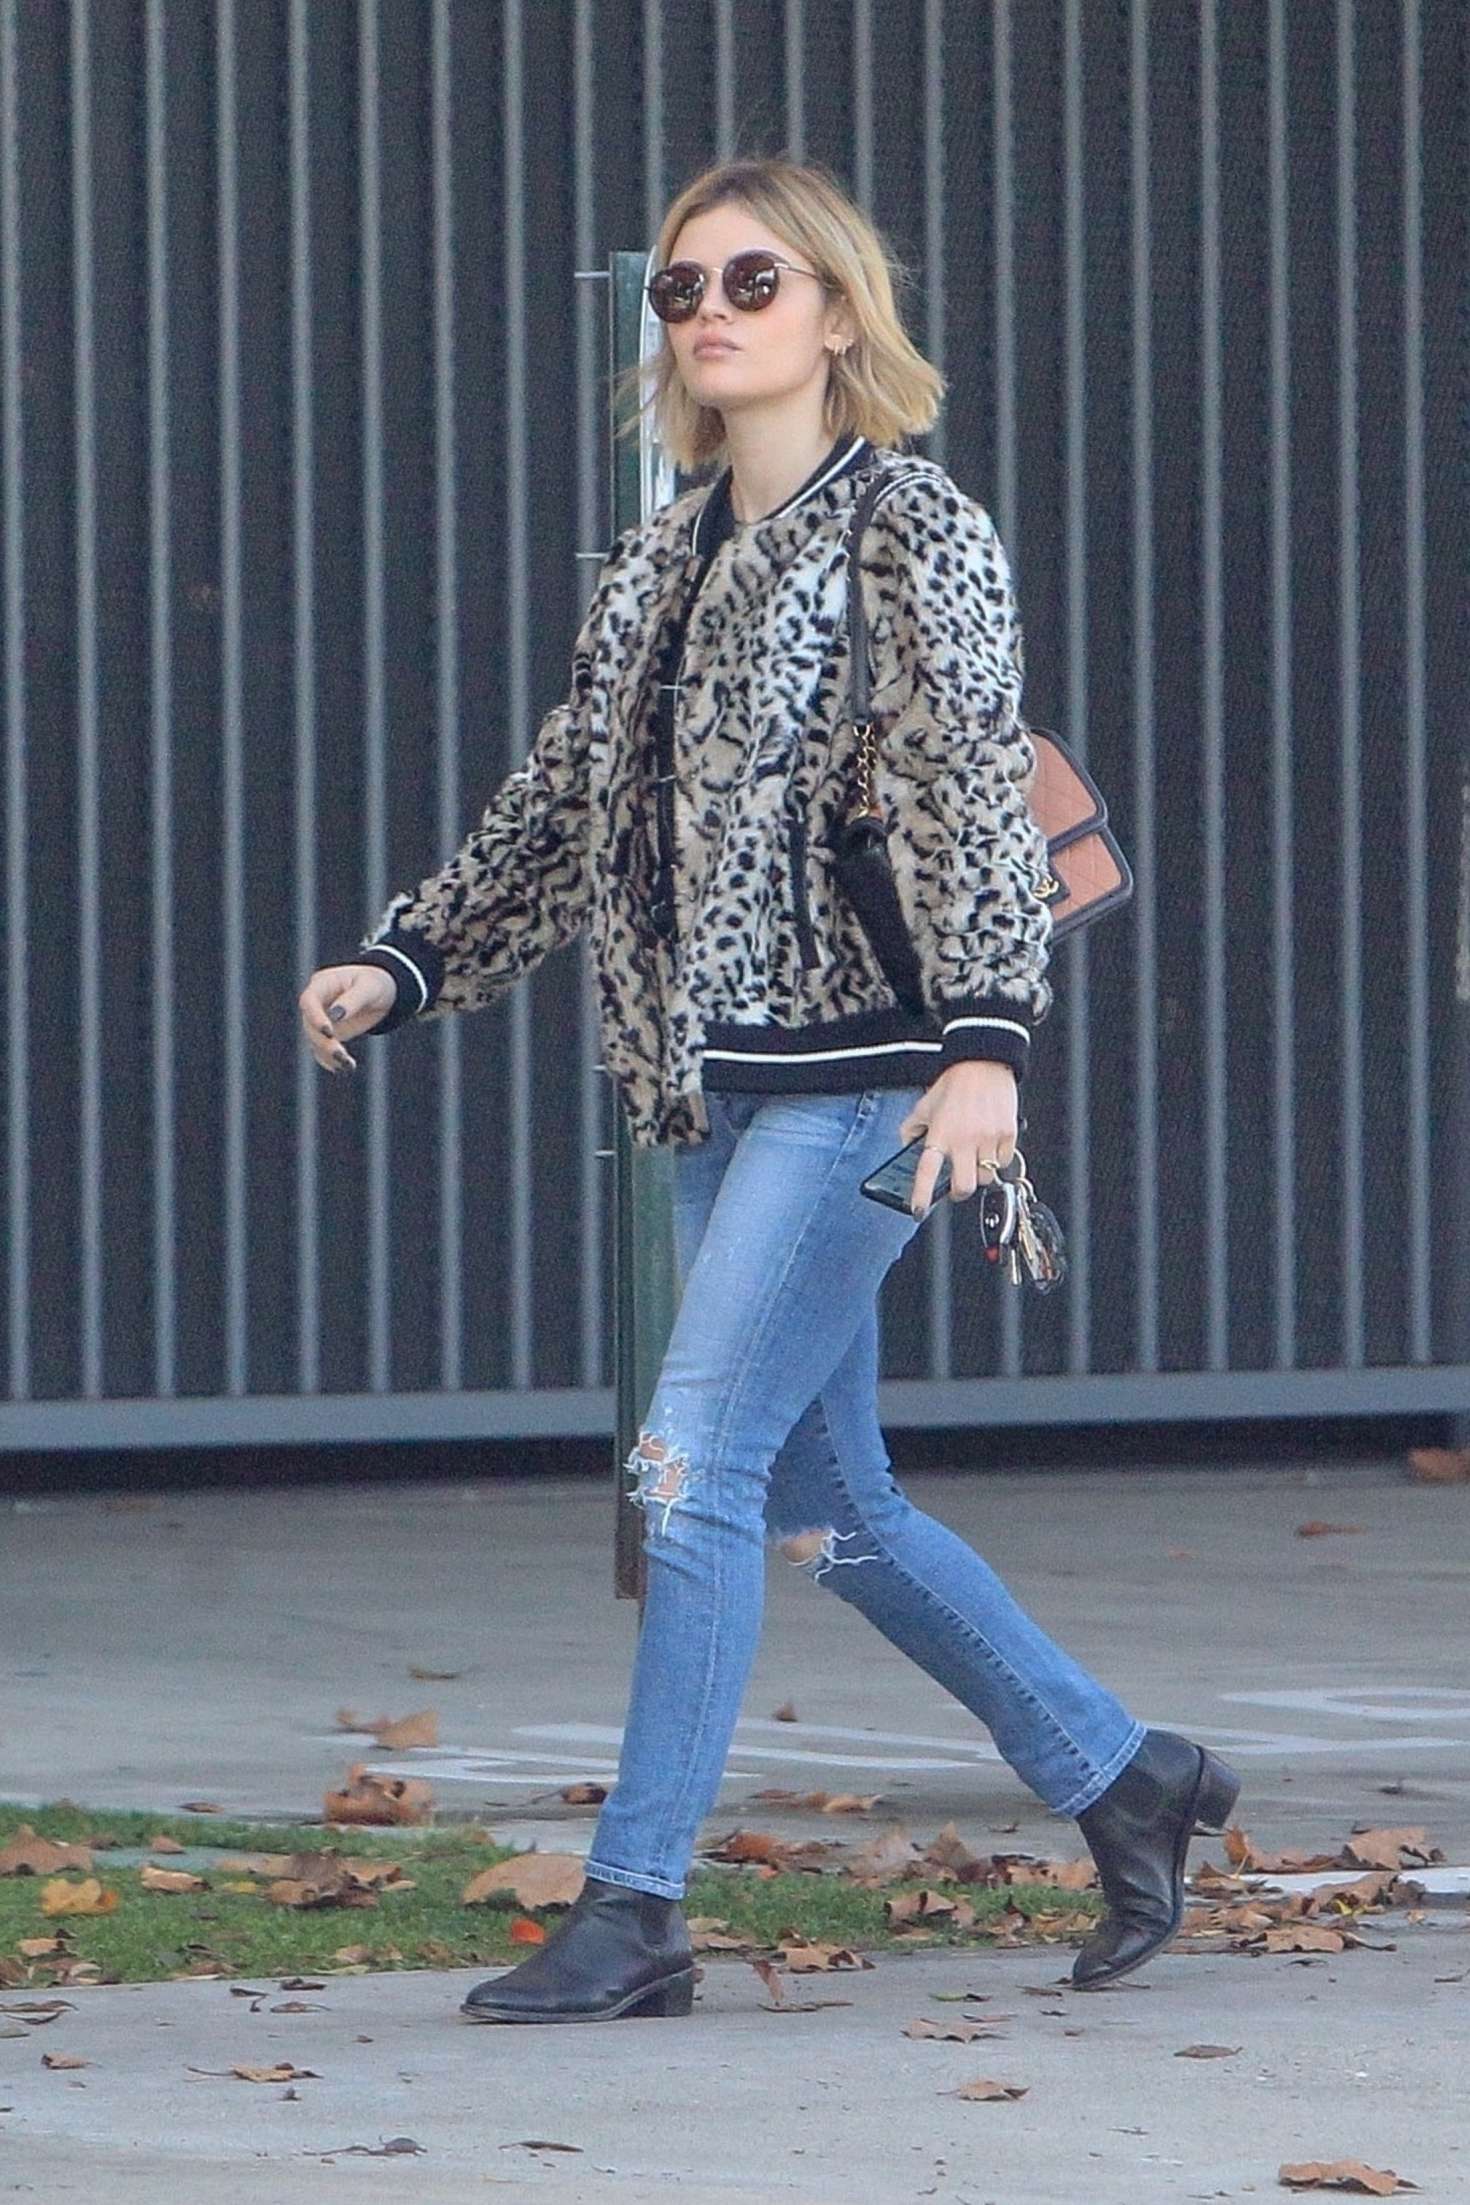 Lucy Hale in Animal Print Jacket â€“ Out in Los Angeles